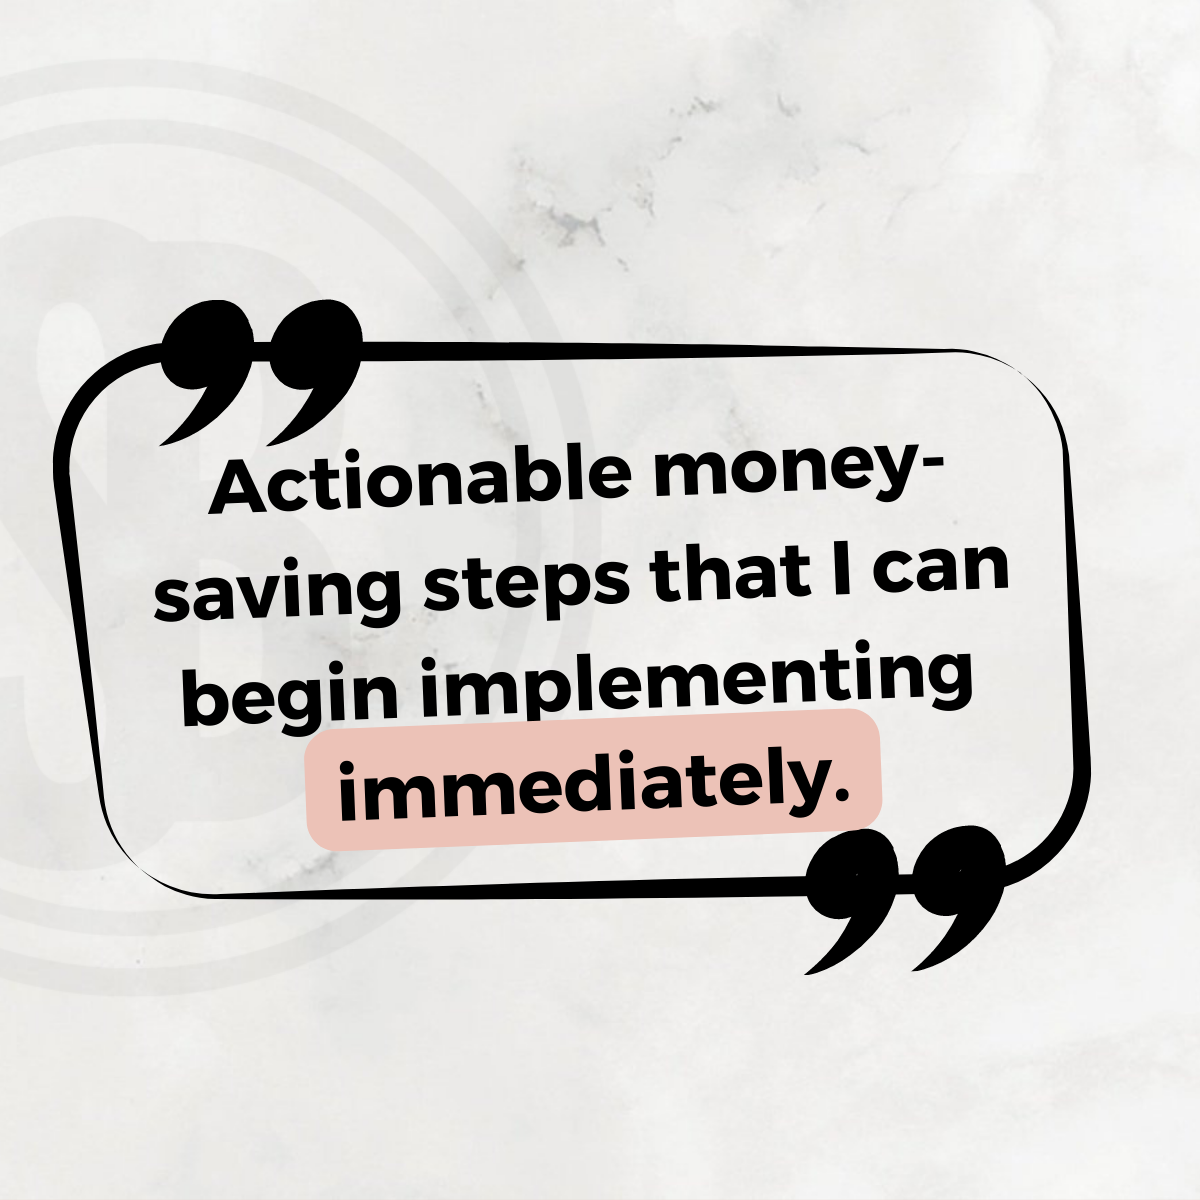 Testimonial from a masterclass participant, which reads: Actionable money-saving steps that I can begin implementing immediately.